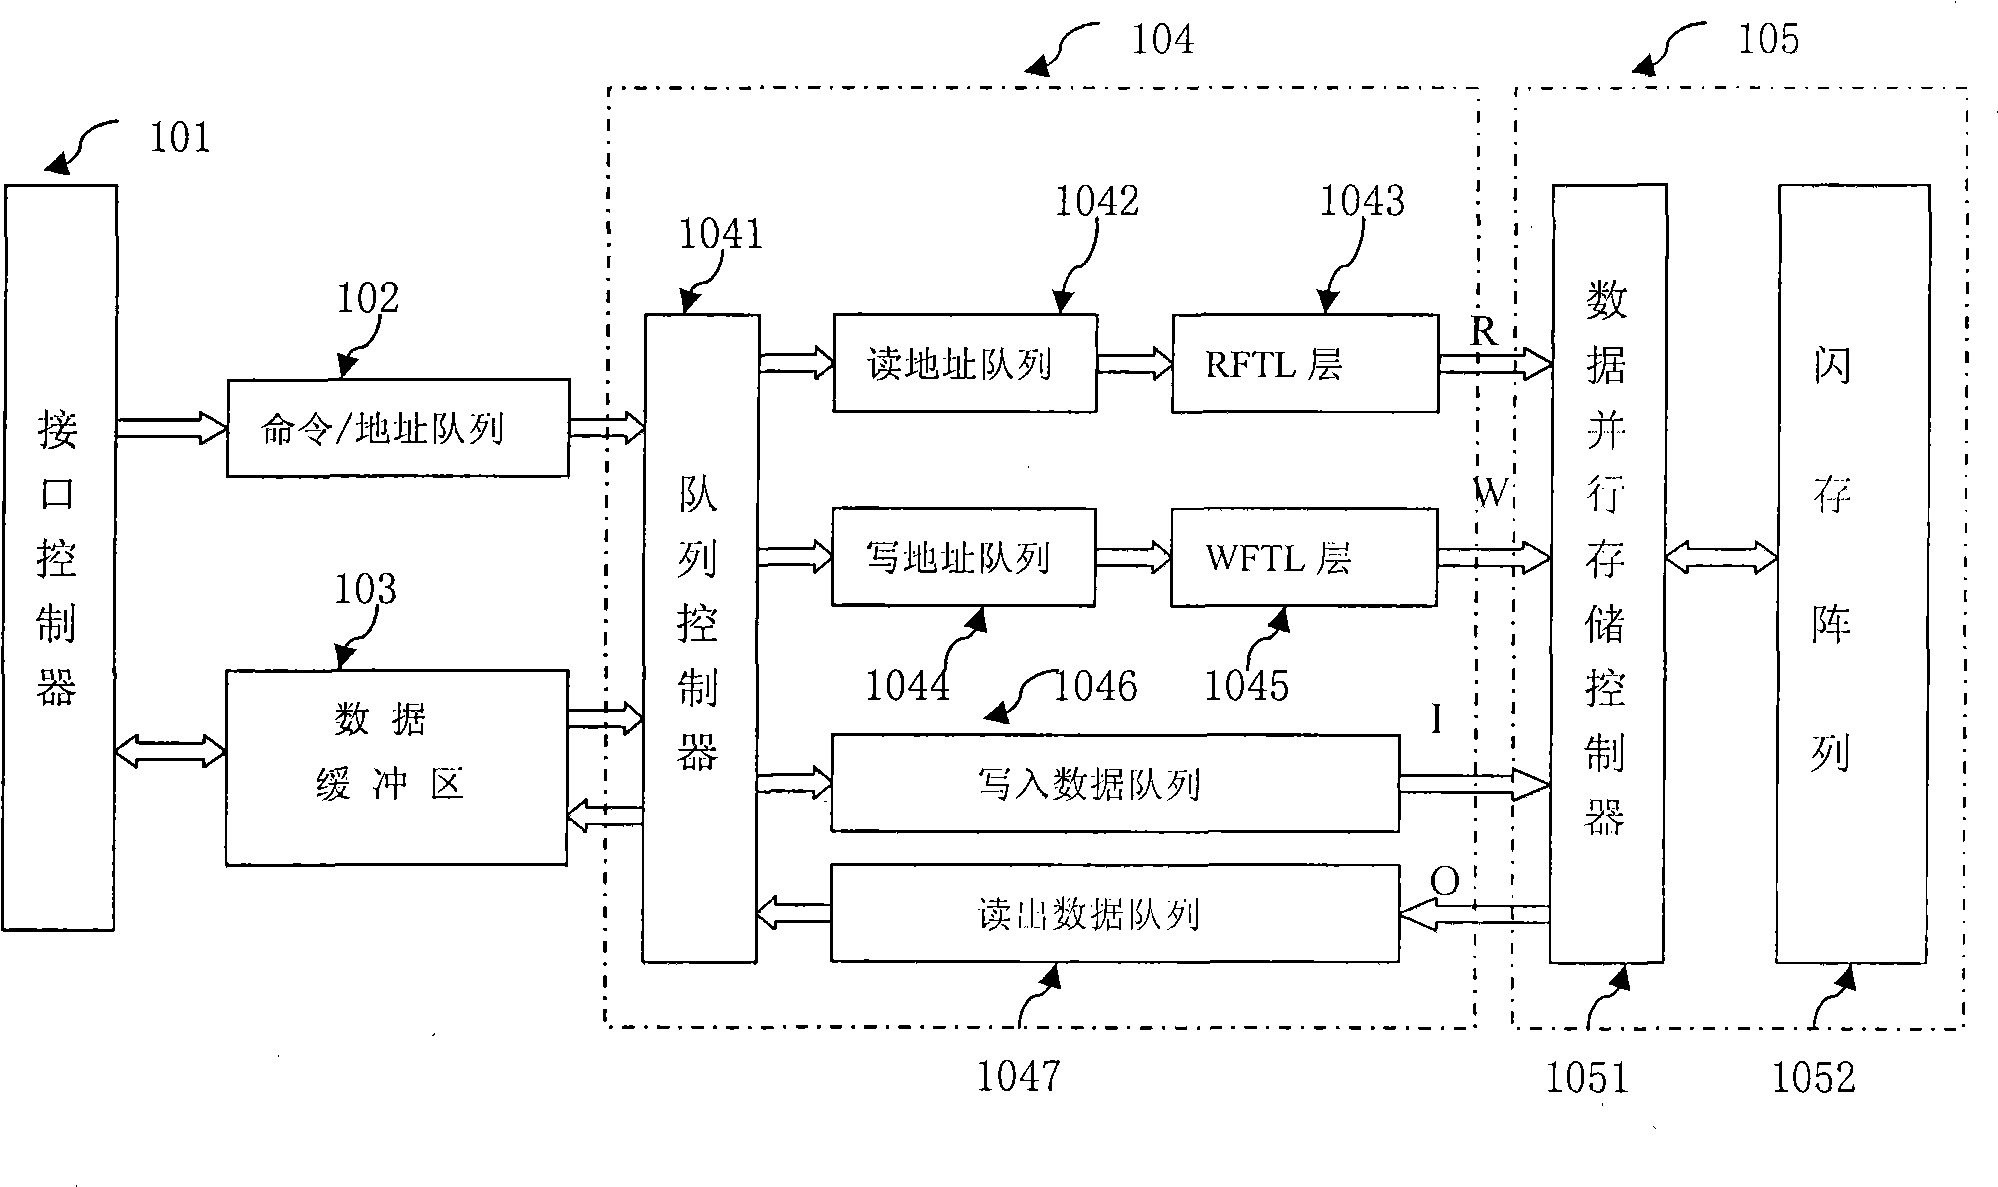 Solid state disk controller